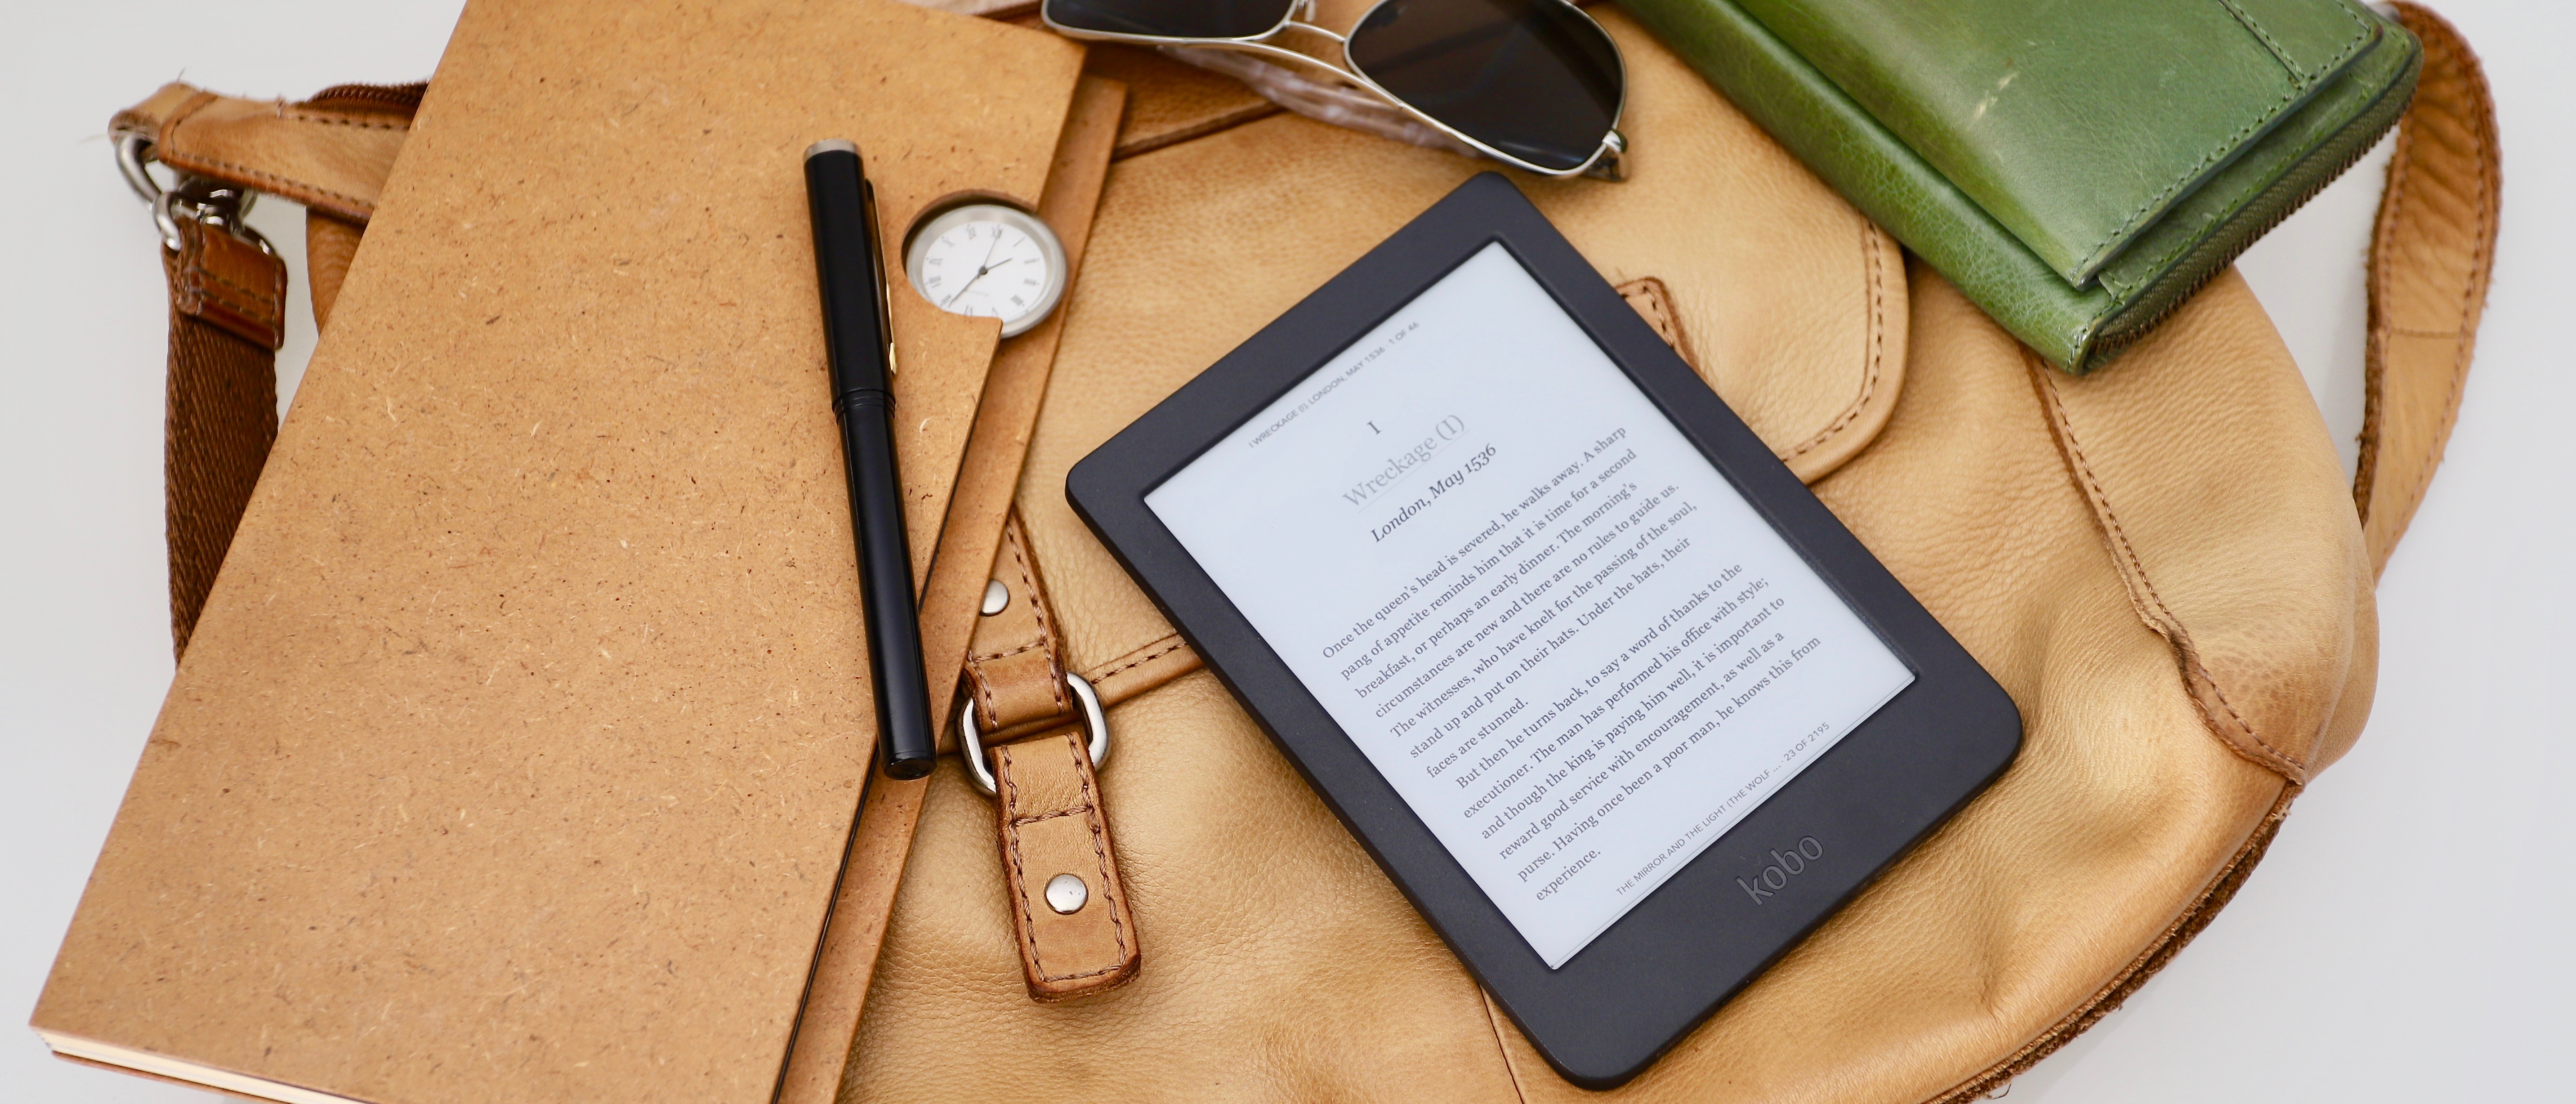 Kindle Basic vs Kobo Nia – Which one is better? - Good e-Reader